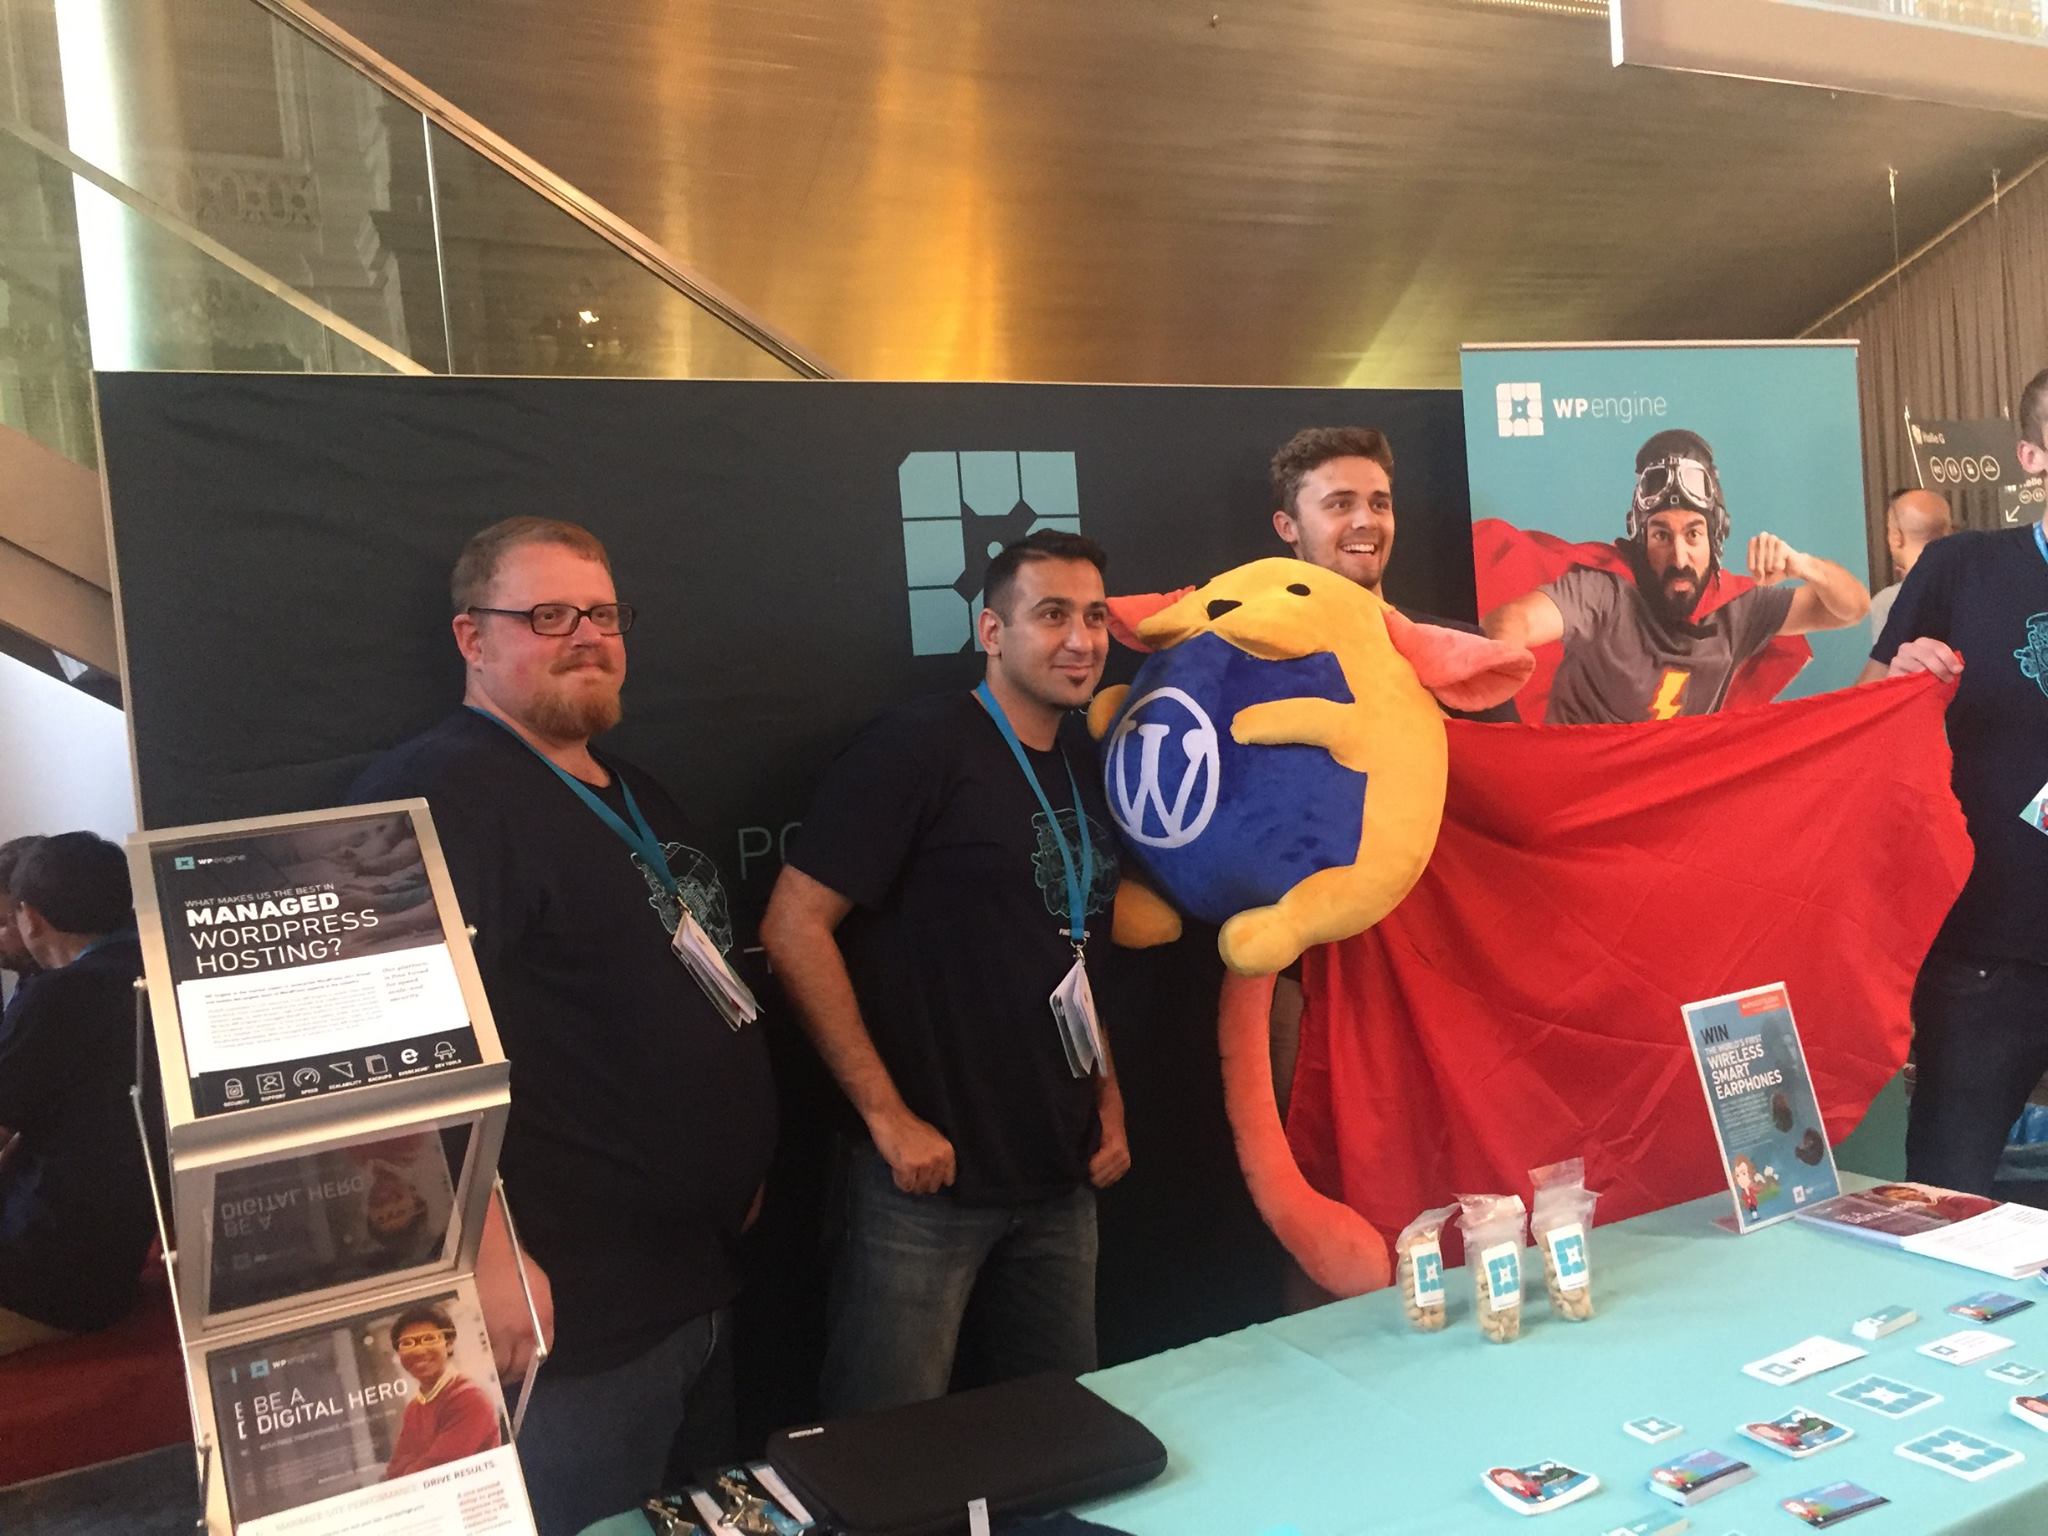 The WP Engine UK team poses with Wapuu, the official WordPress mascot. 